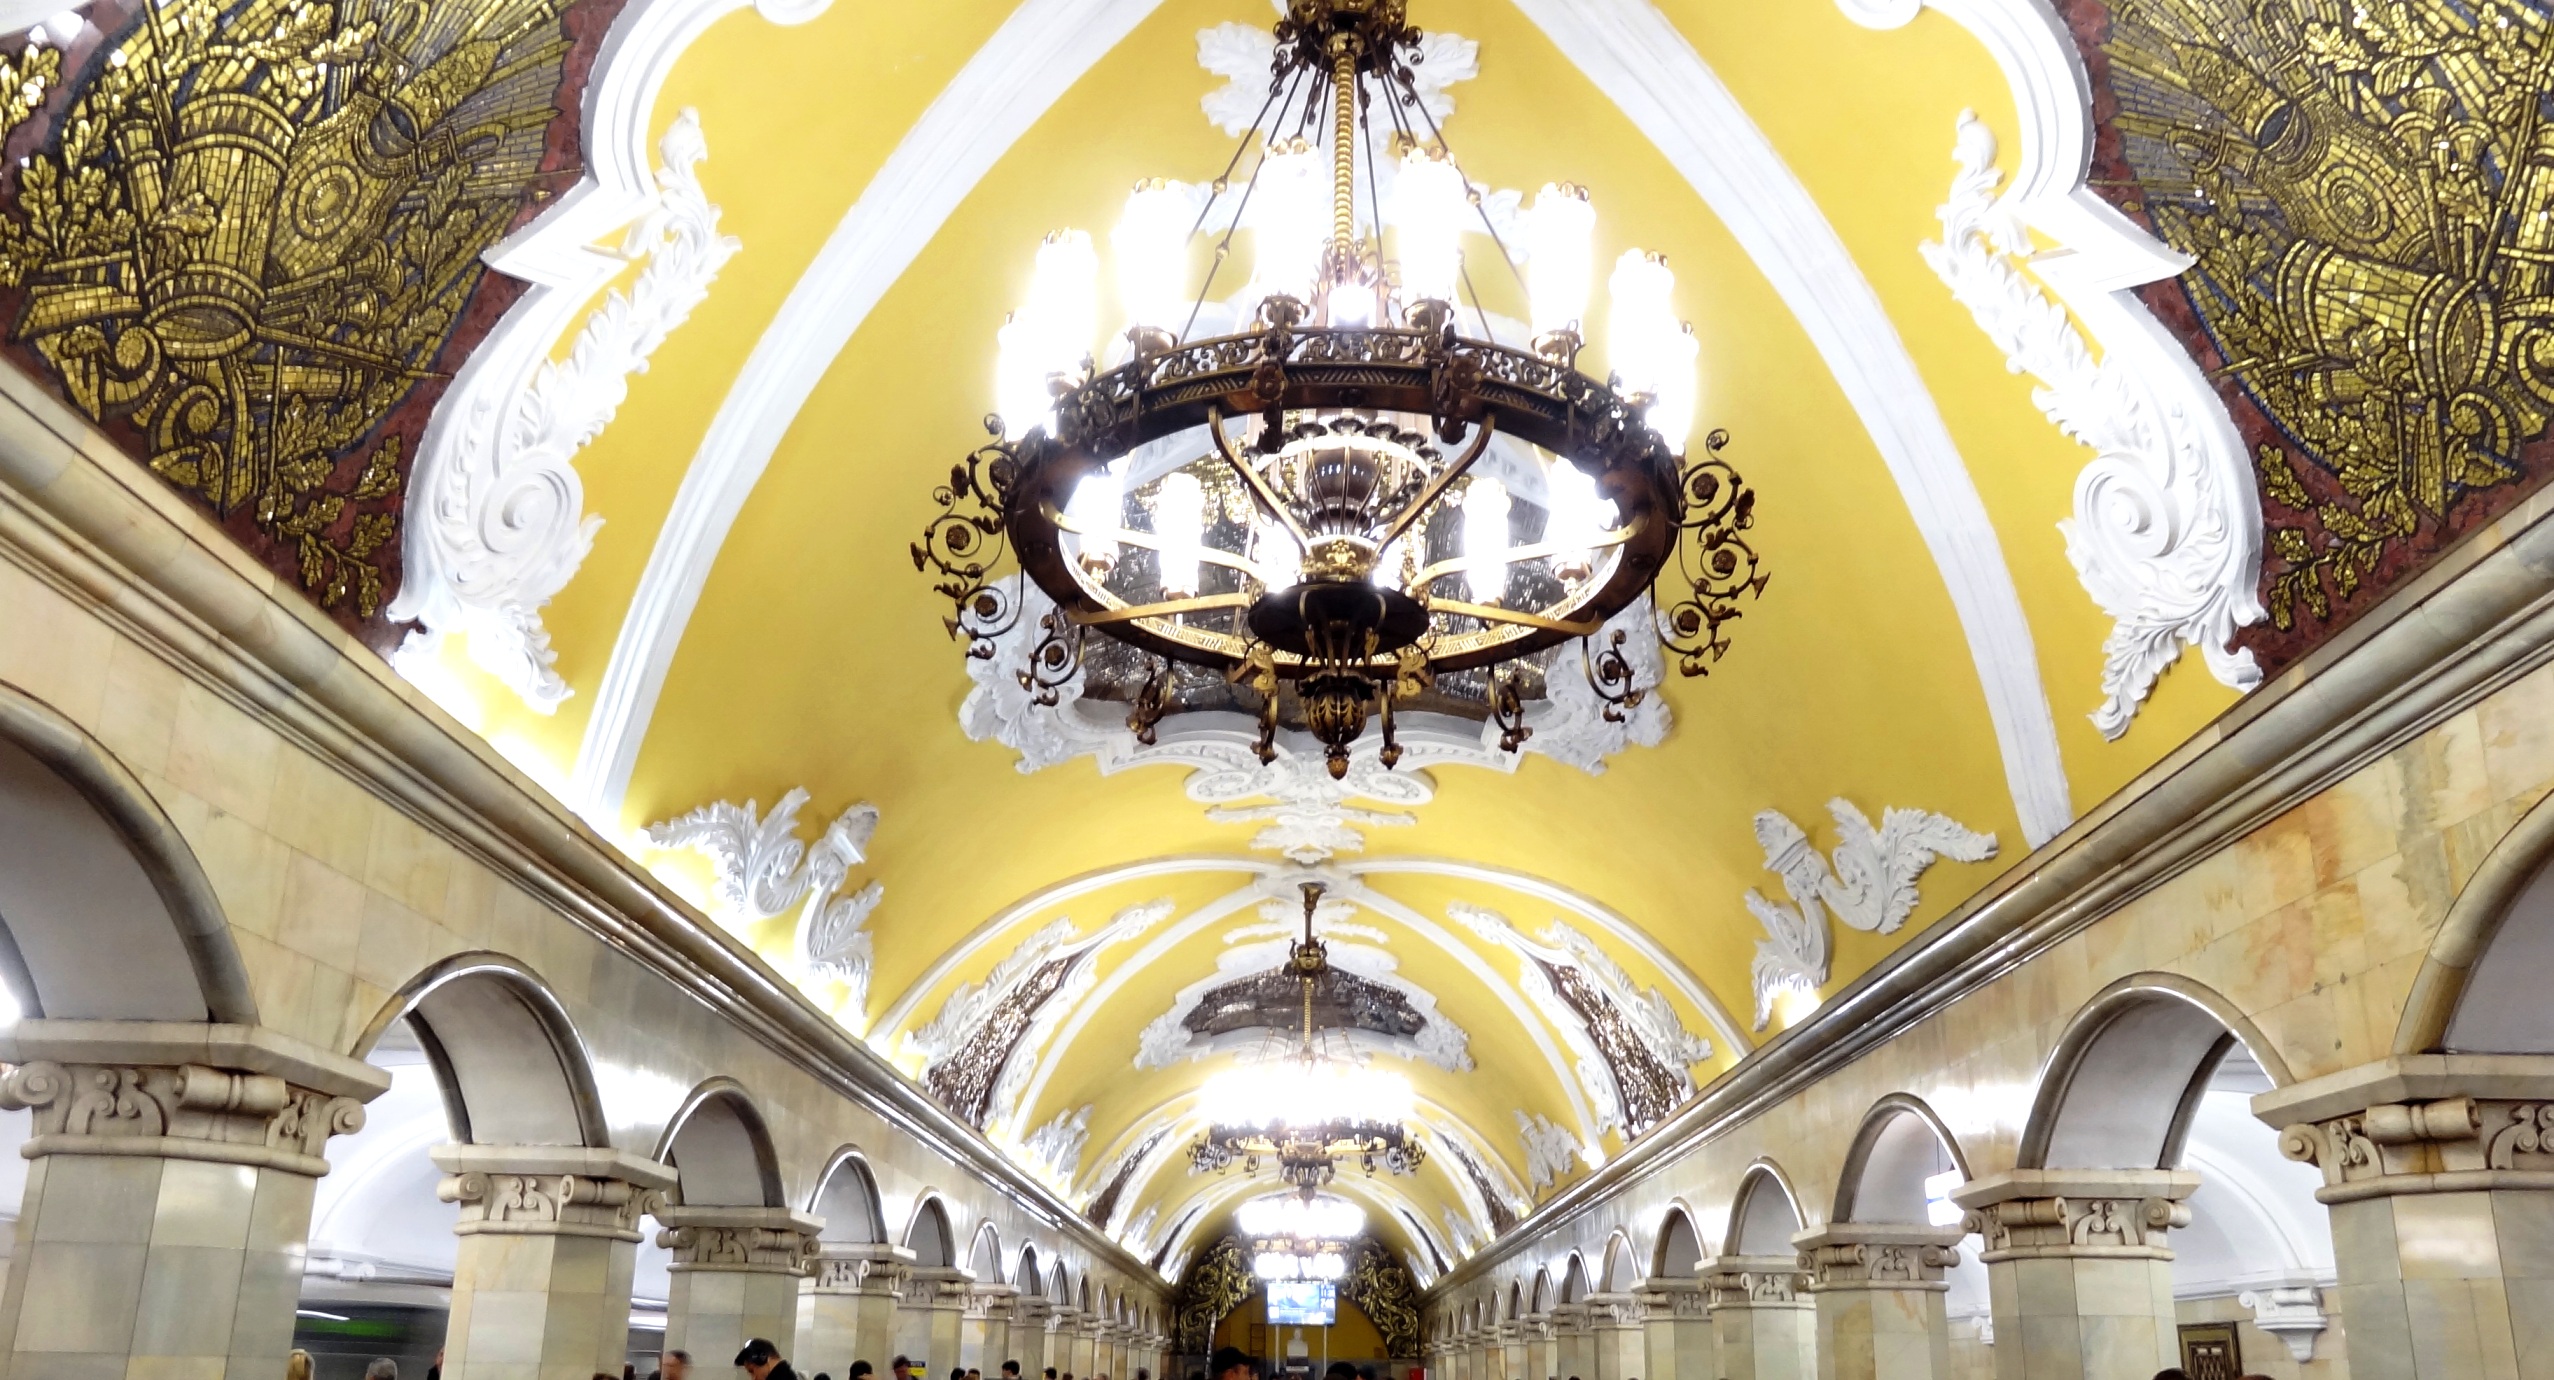 Moscow Metro Stations- Work of Art!